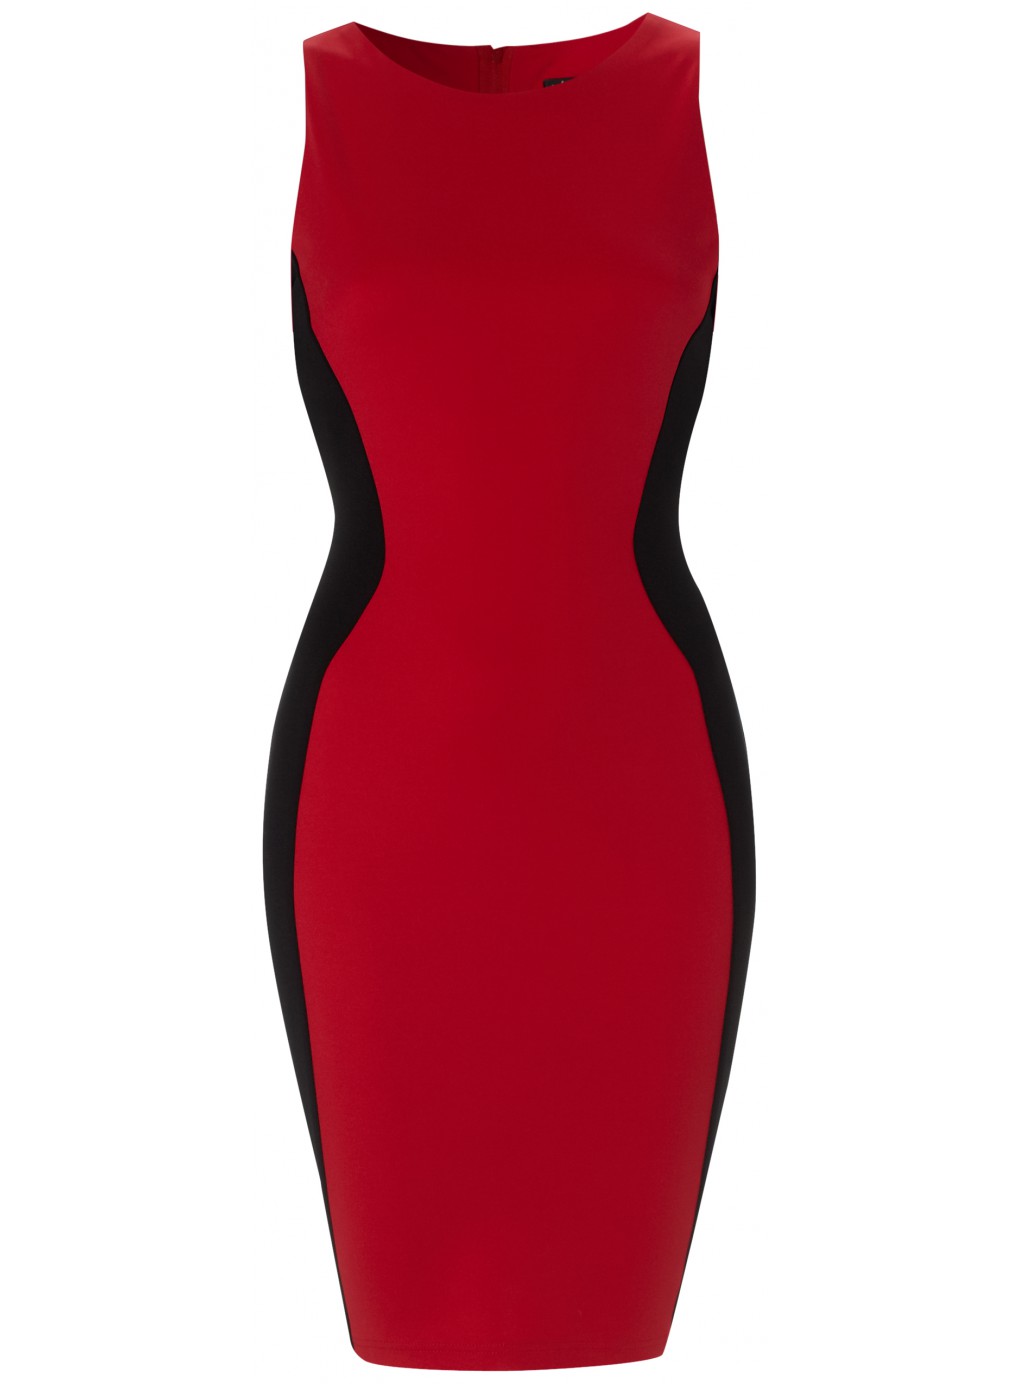 AW12 party wear - The hour glass illusion dress - where did you buy that?